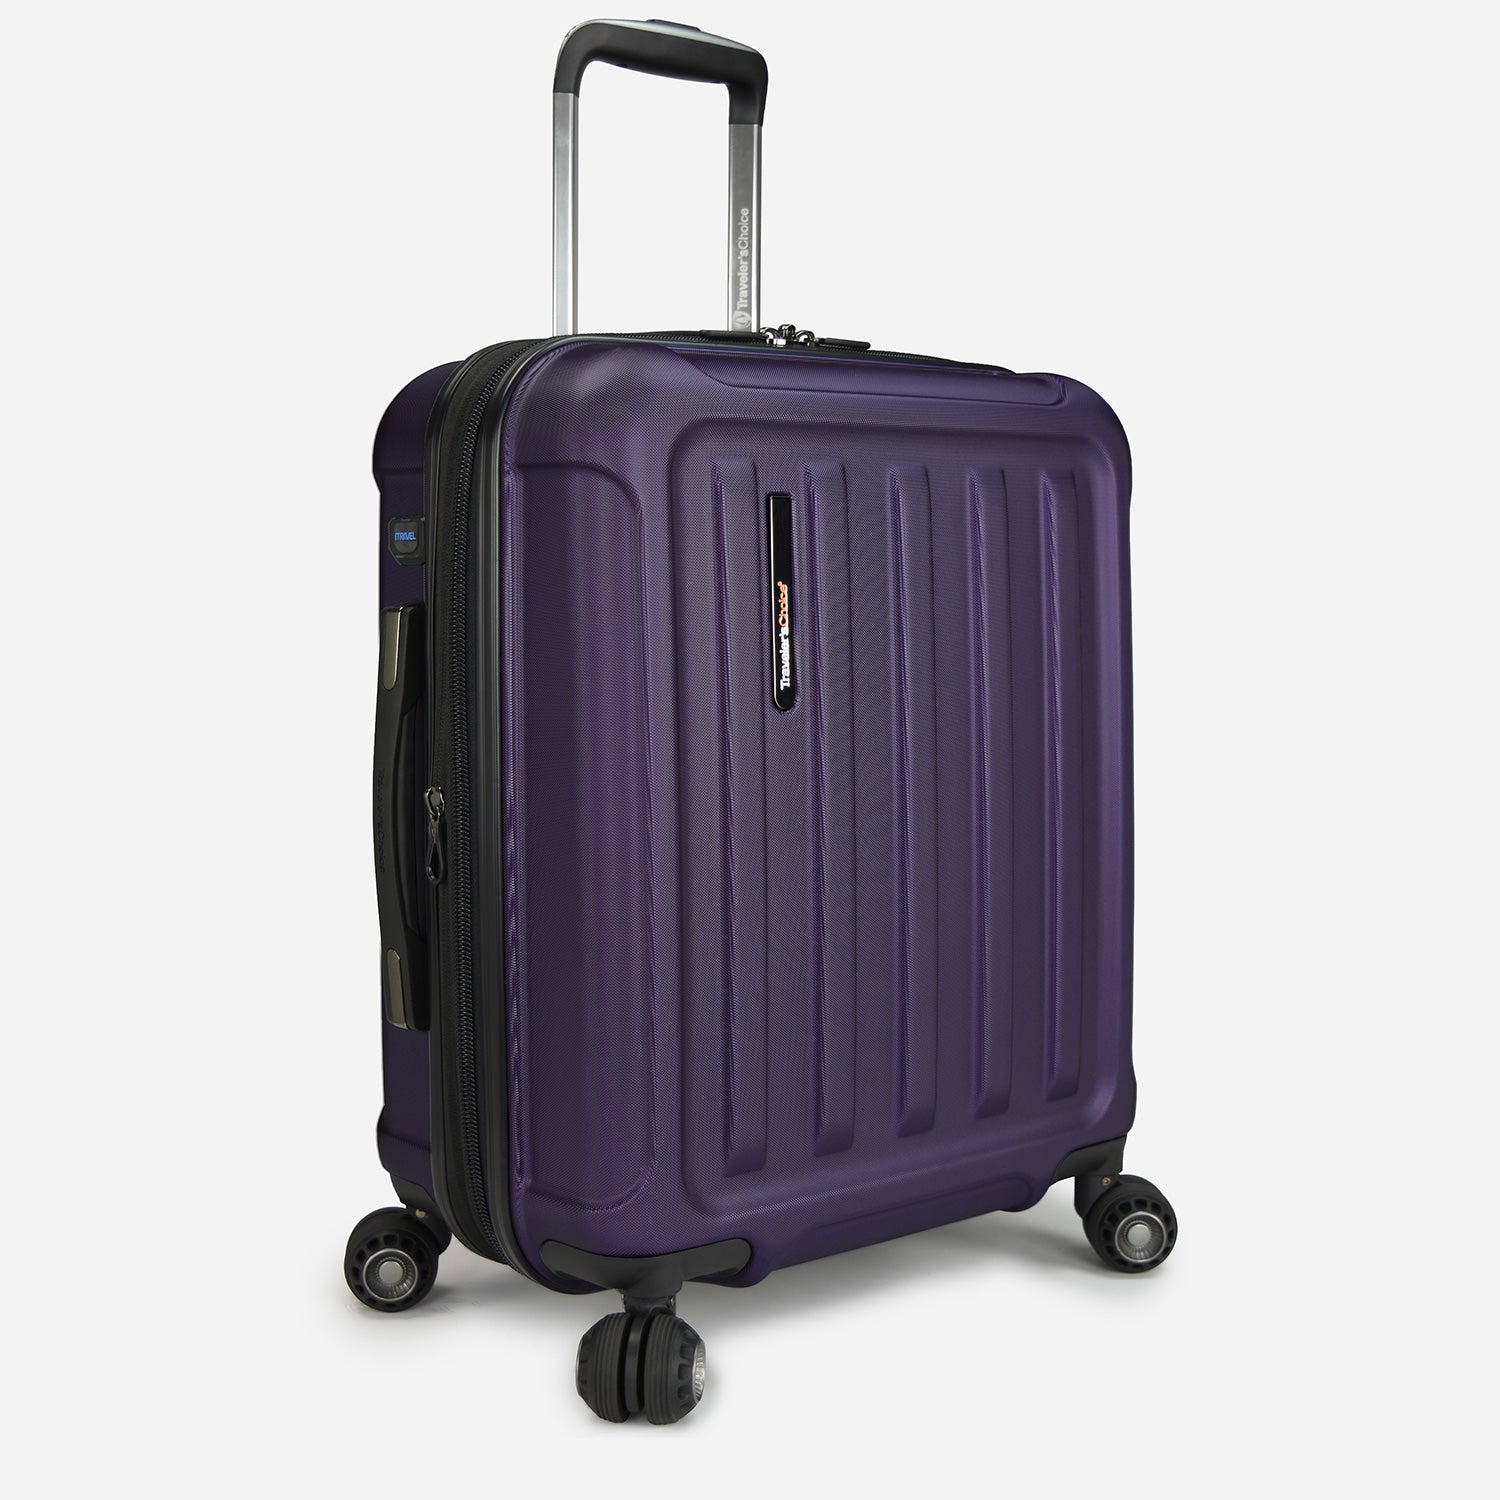 Traveler's Choice The Art of Travel Carry-On Spinner Luggage, Purple